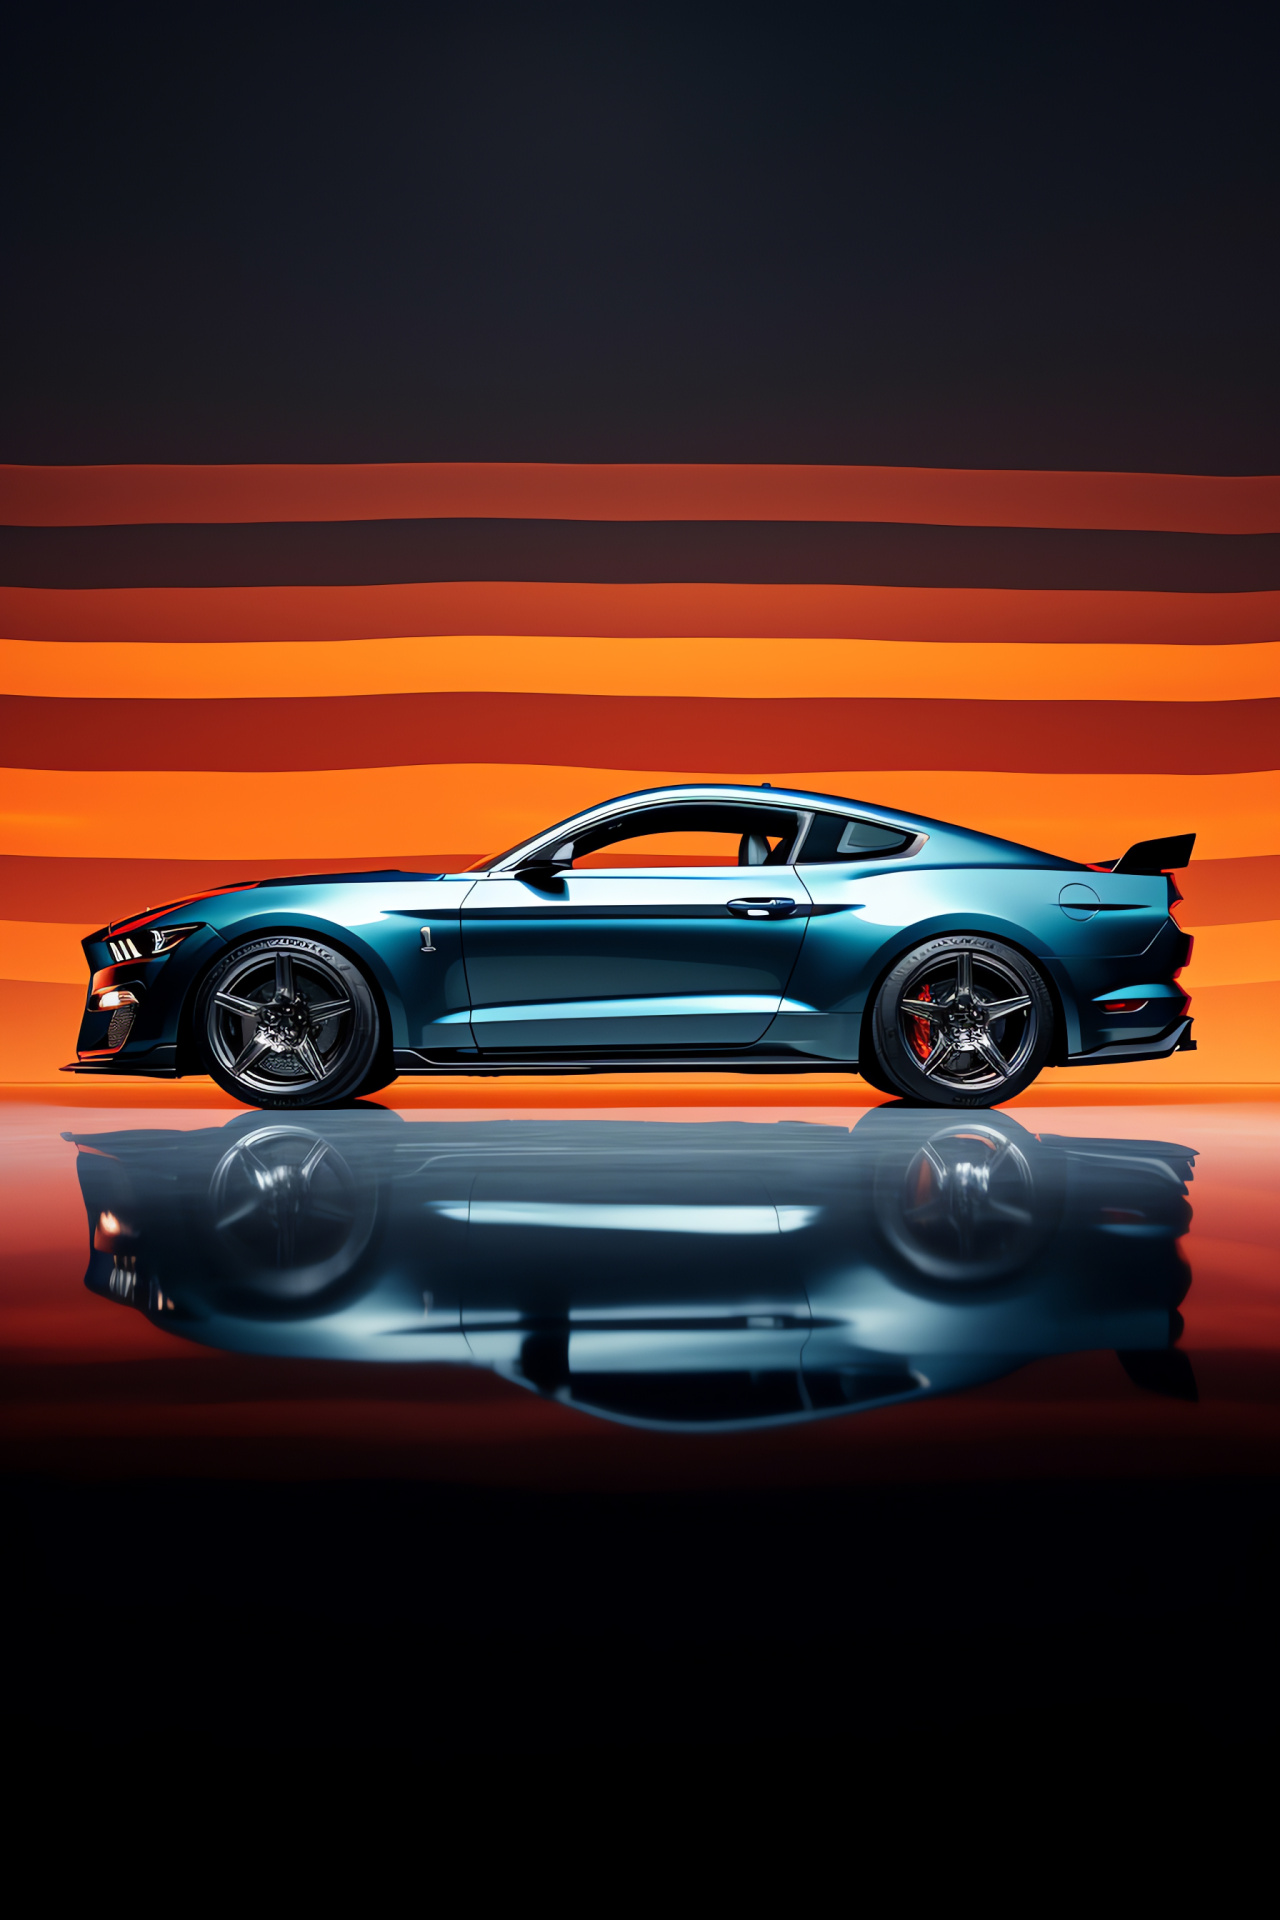 Mustang side profile, Dual-tone refinement, Poised for action, Assertive design language, Vehicle aesthetics, HD Phone Image